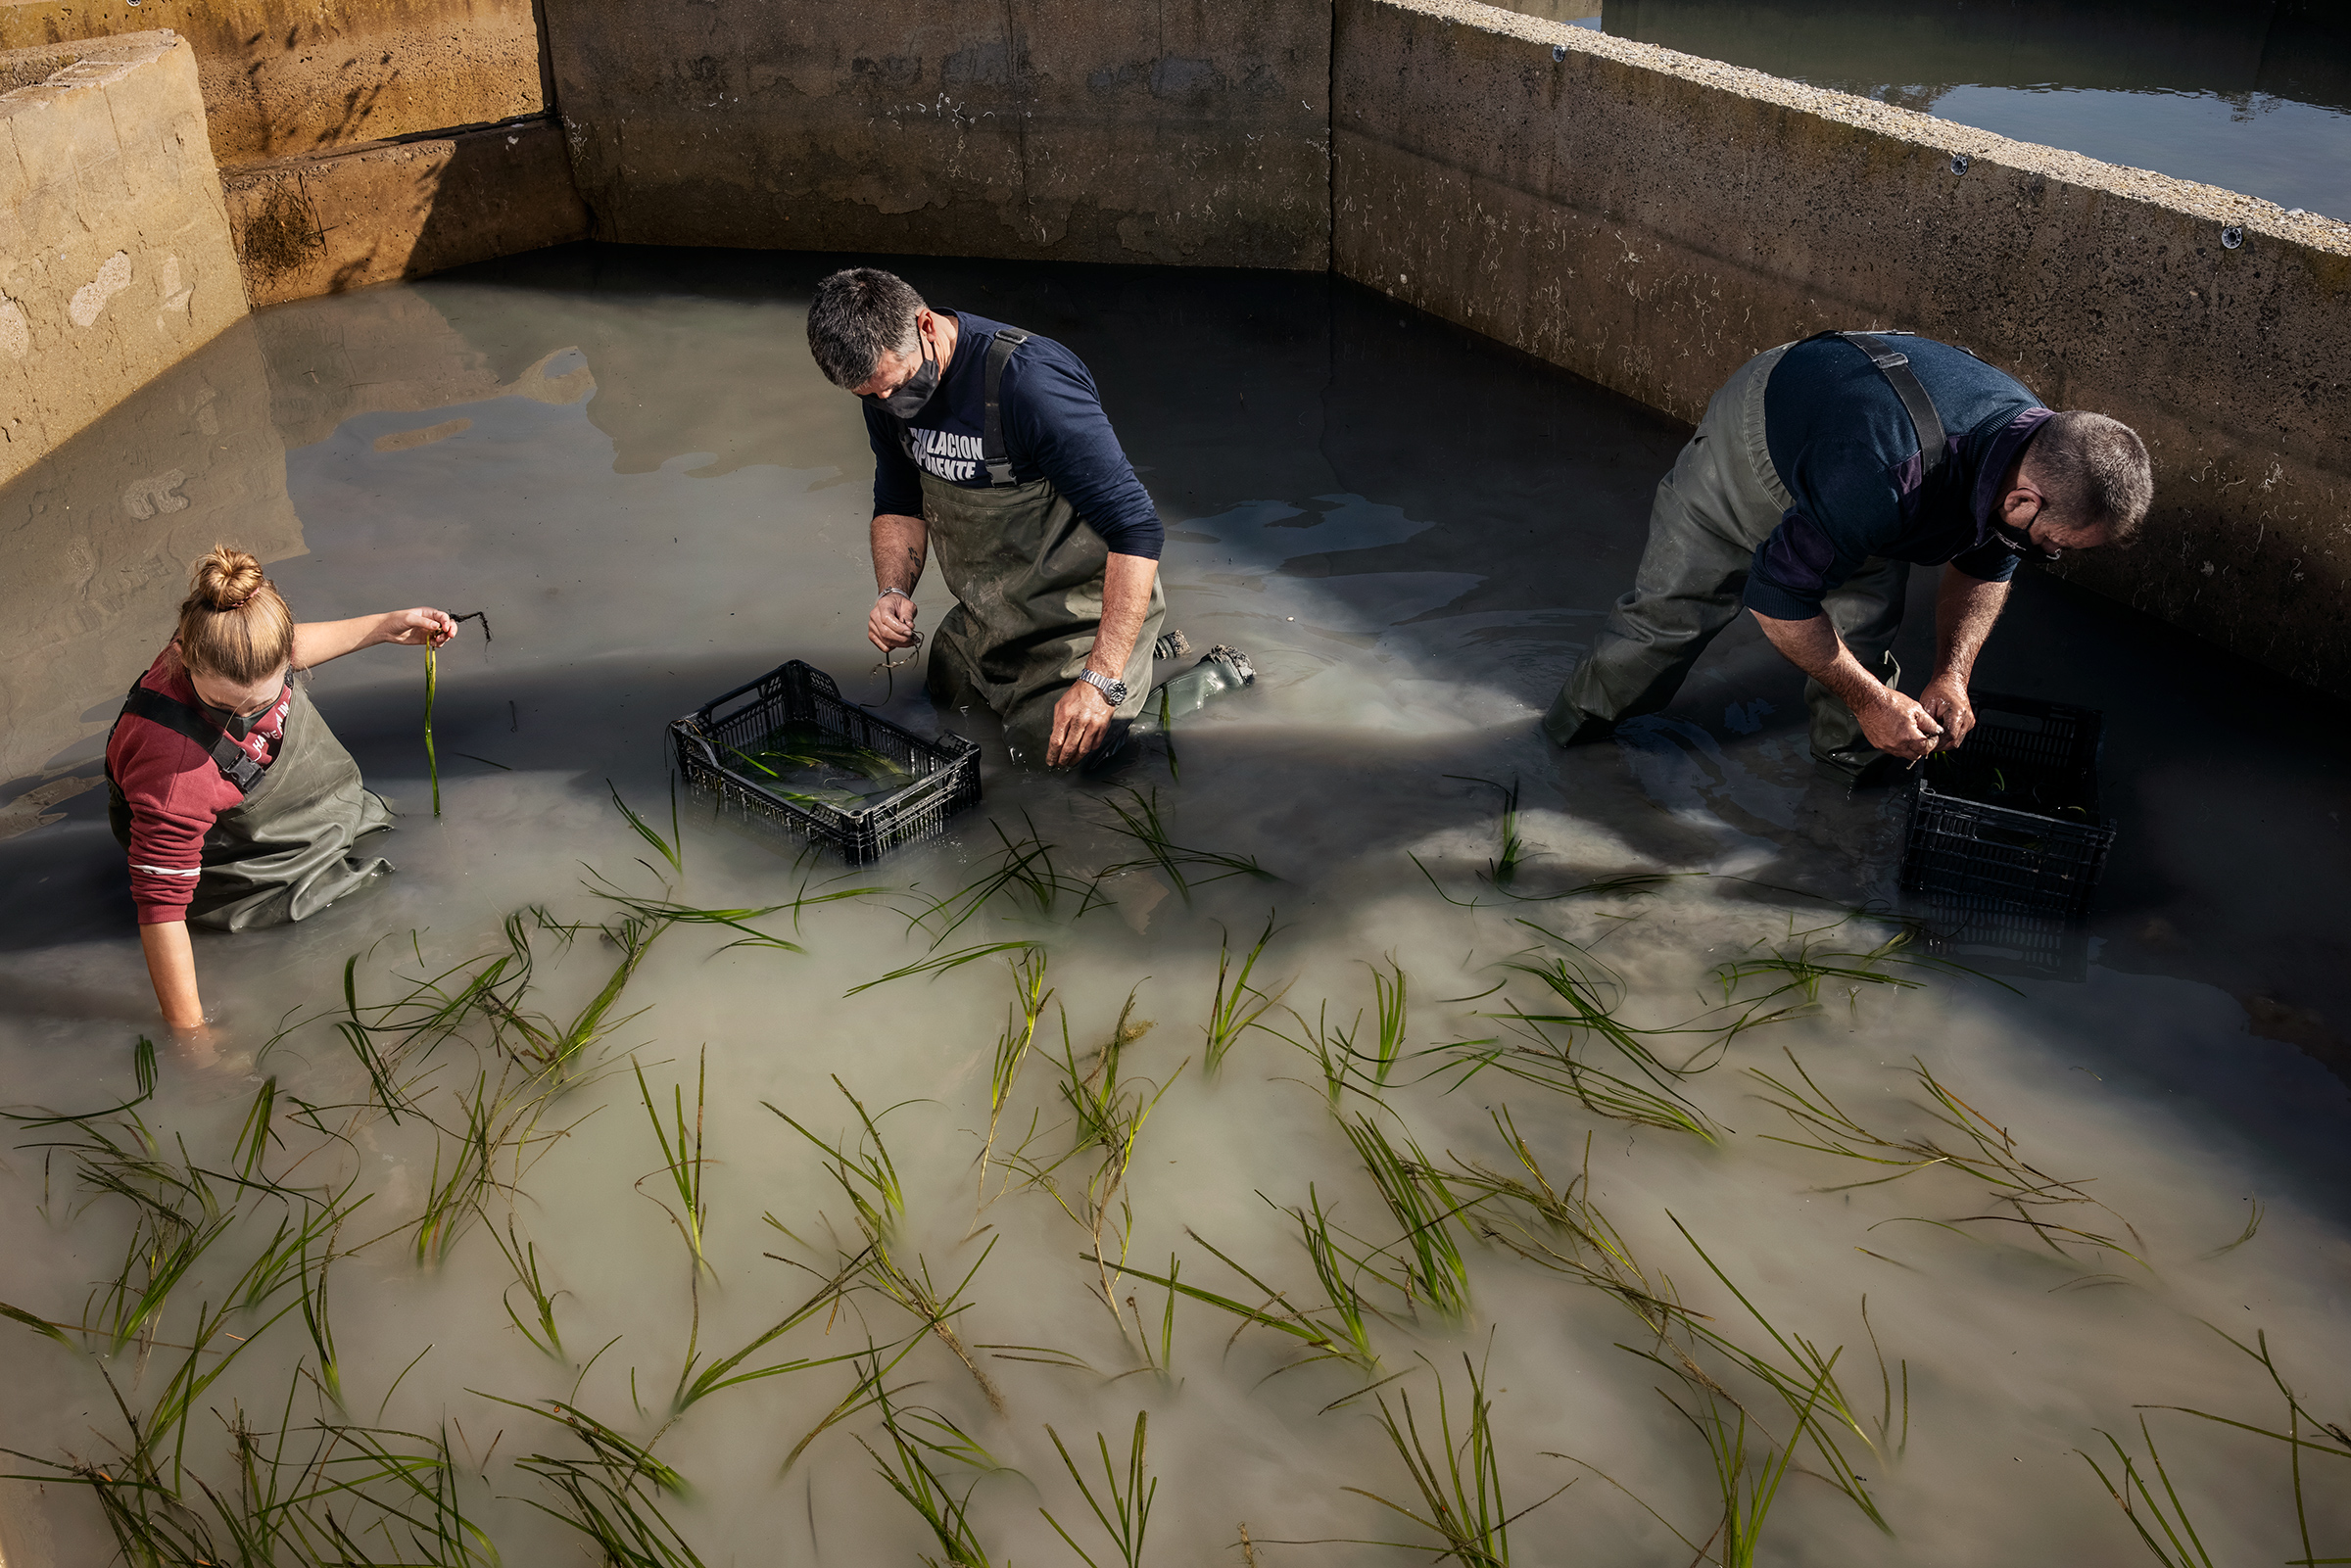 Juan Martín, center, of Aponiente works on the seagrass fields planted near León’s restaurant (Paolo Verzone—VU for TIME)